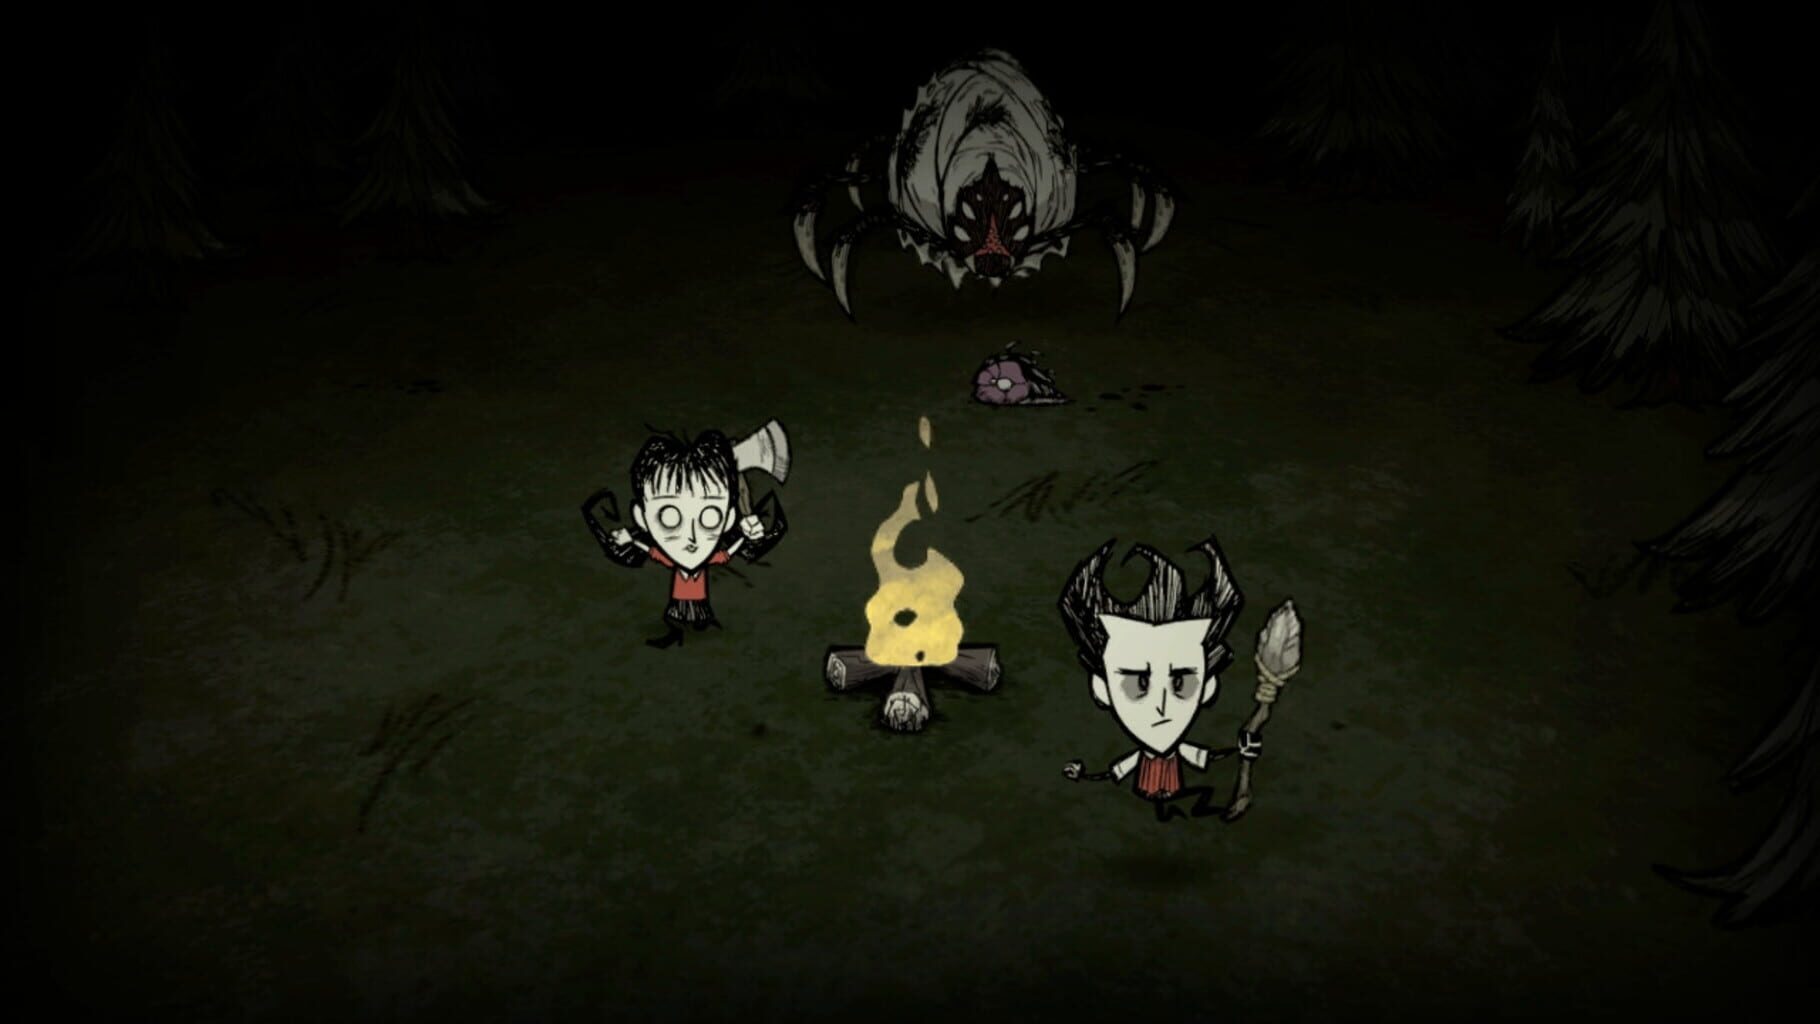 dont starve together solo cheats